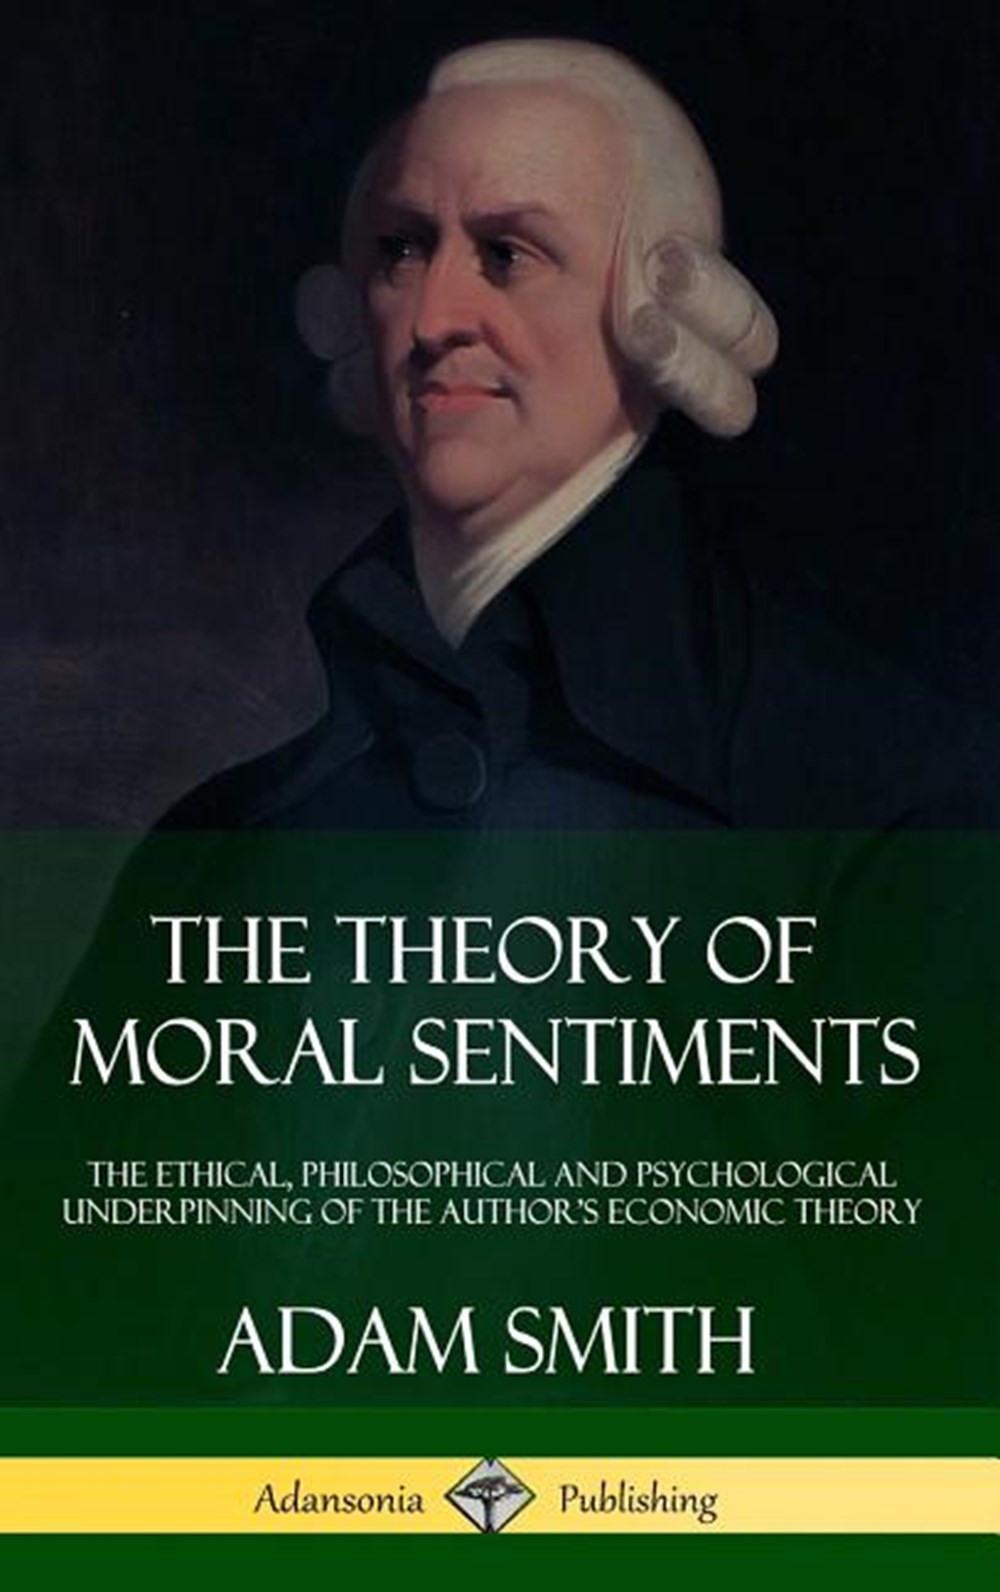 Theory of Moral Sentiments The Ethical, Philosophical and Psychological Underpinning of the Author's